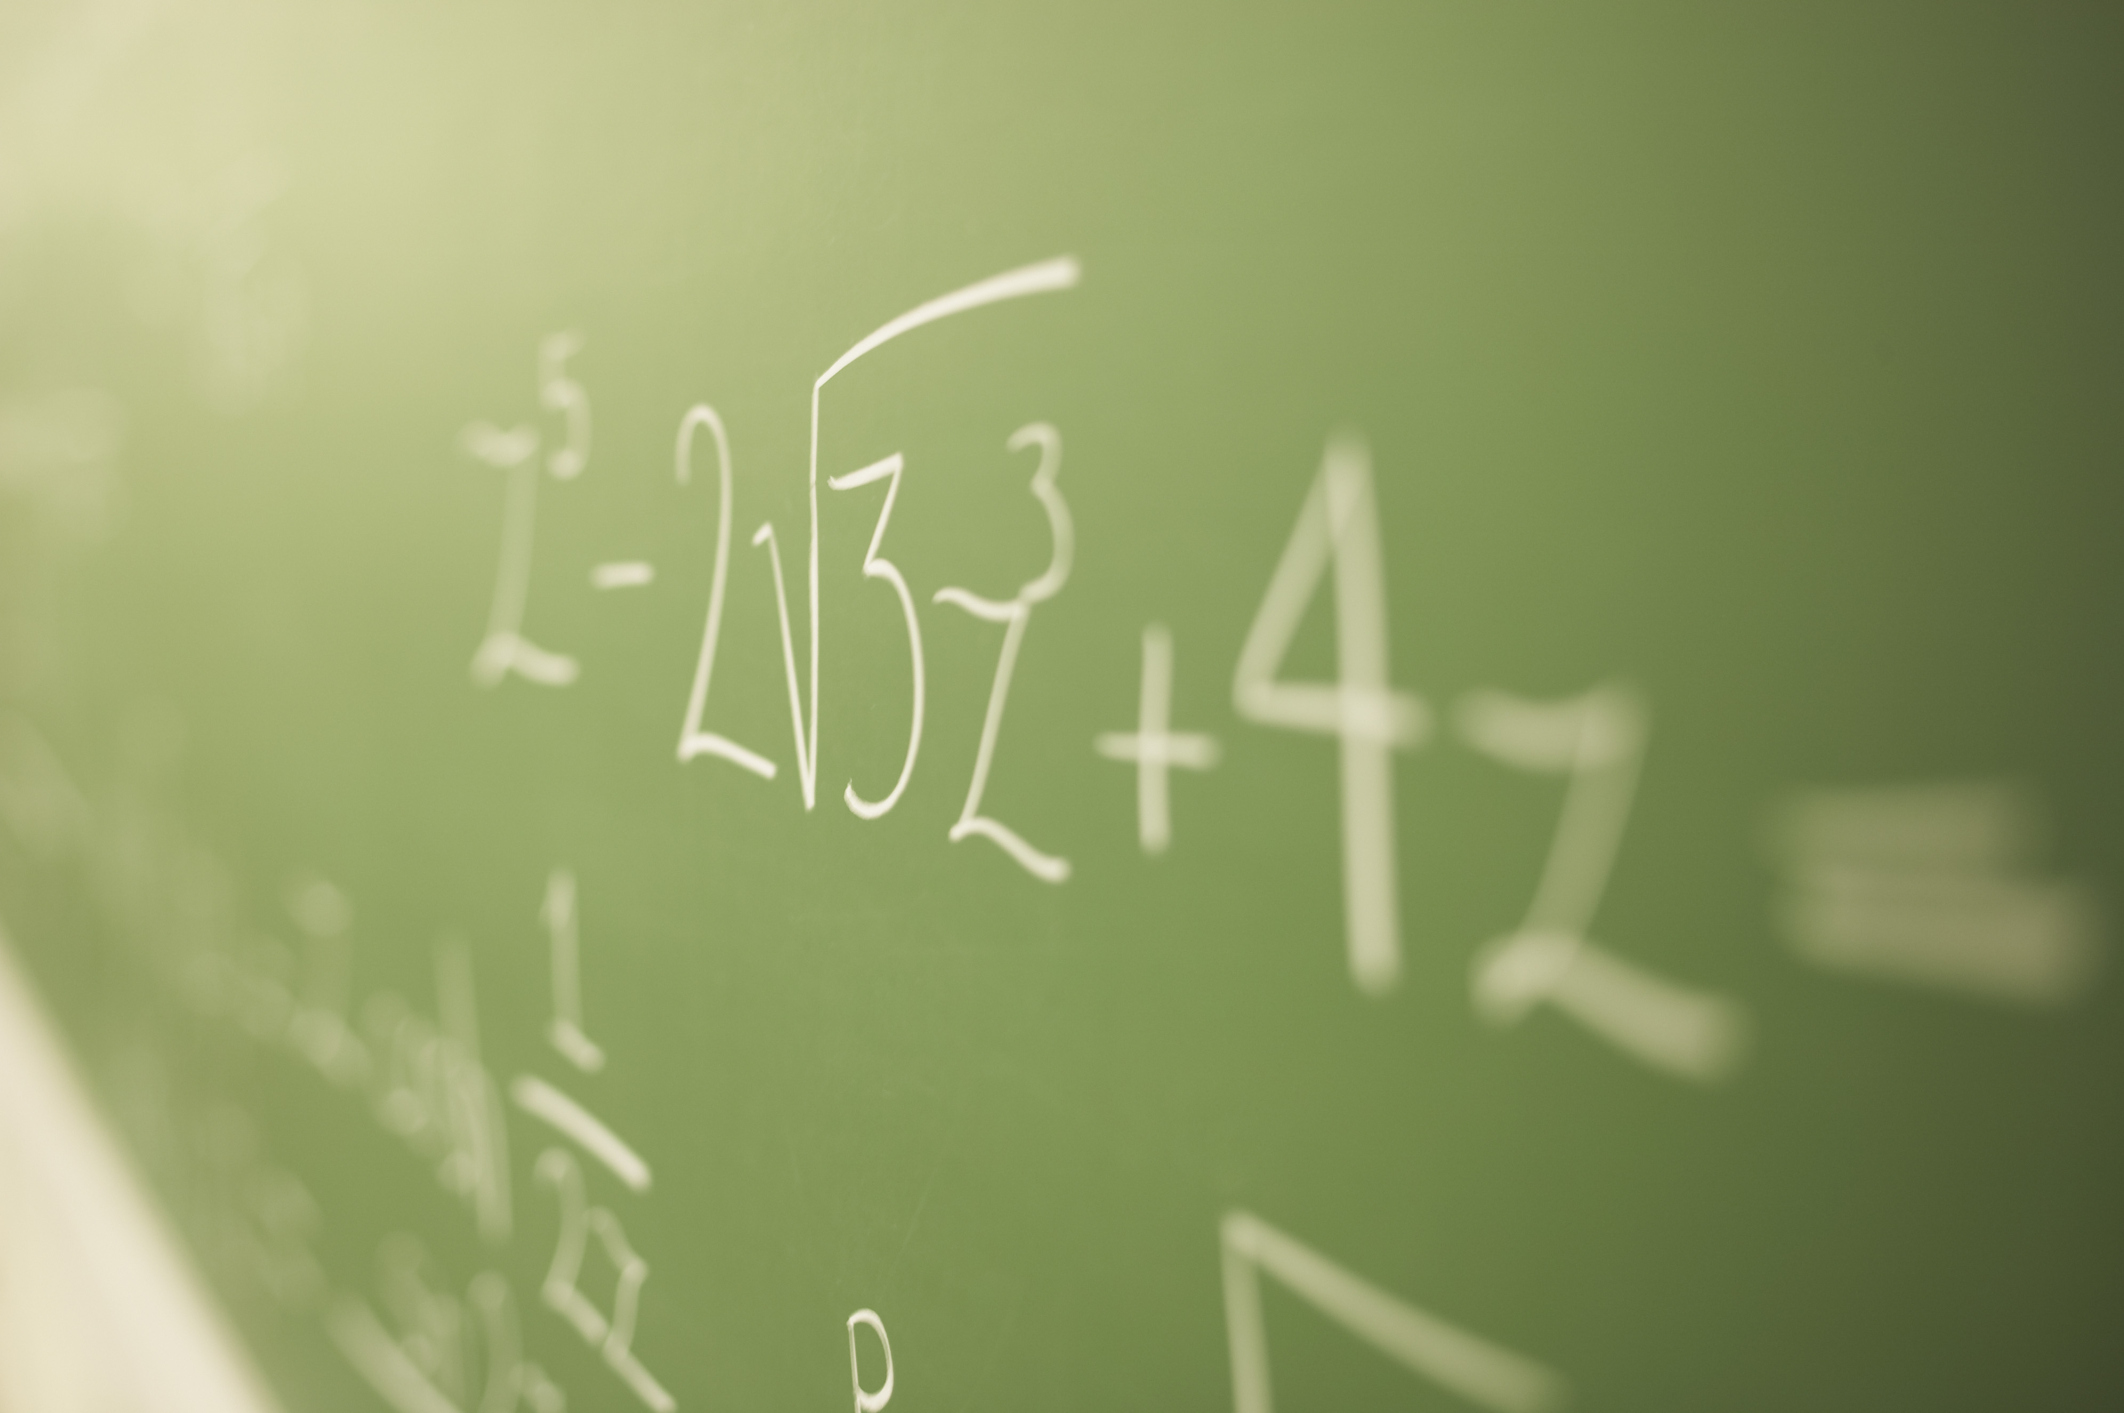 Why Common Core’s Math Standards Don’t Measure Up (by Guest Blogger Ze